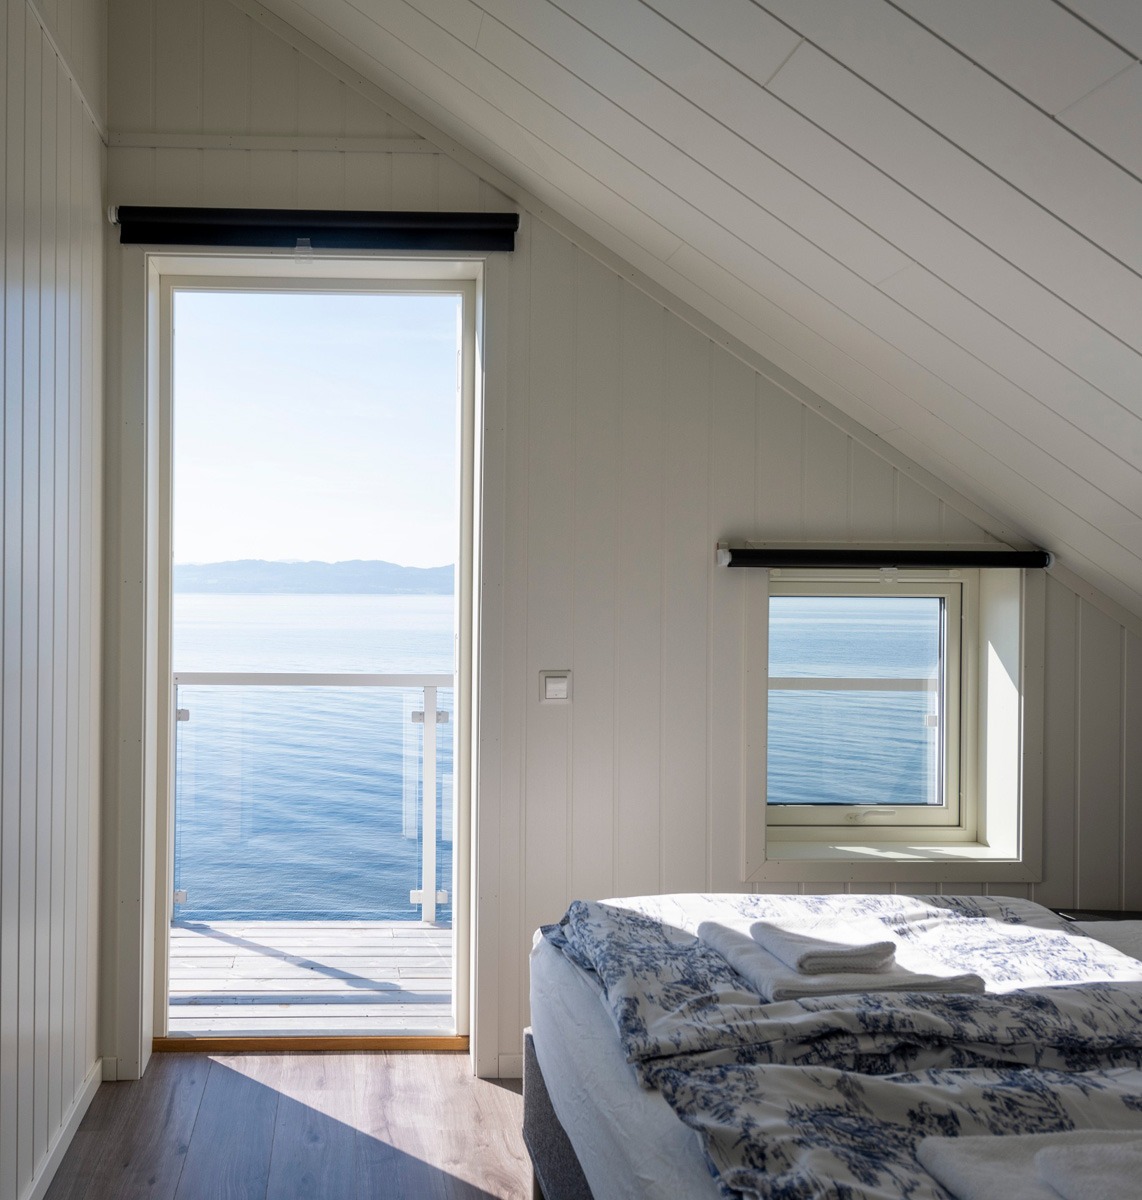 Comfortable beds where you can fall asleep to the sound of crashing waves and wake up to breathtaking views, providing peace of mind and renewed energy.